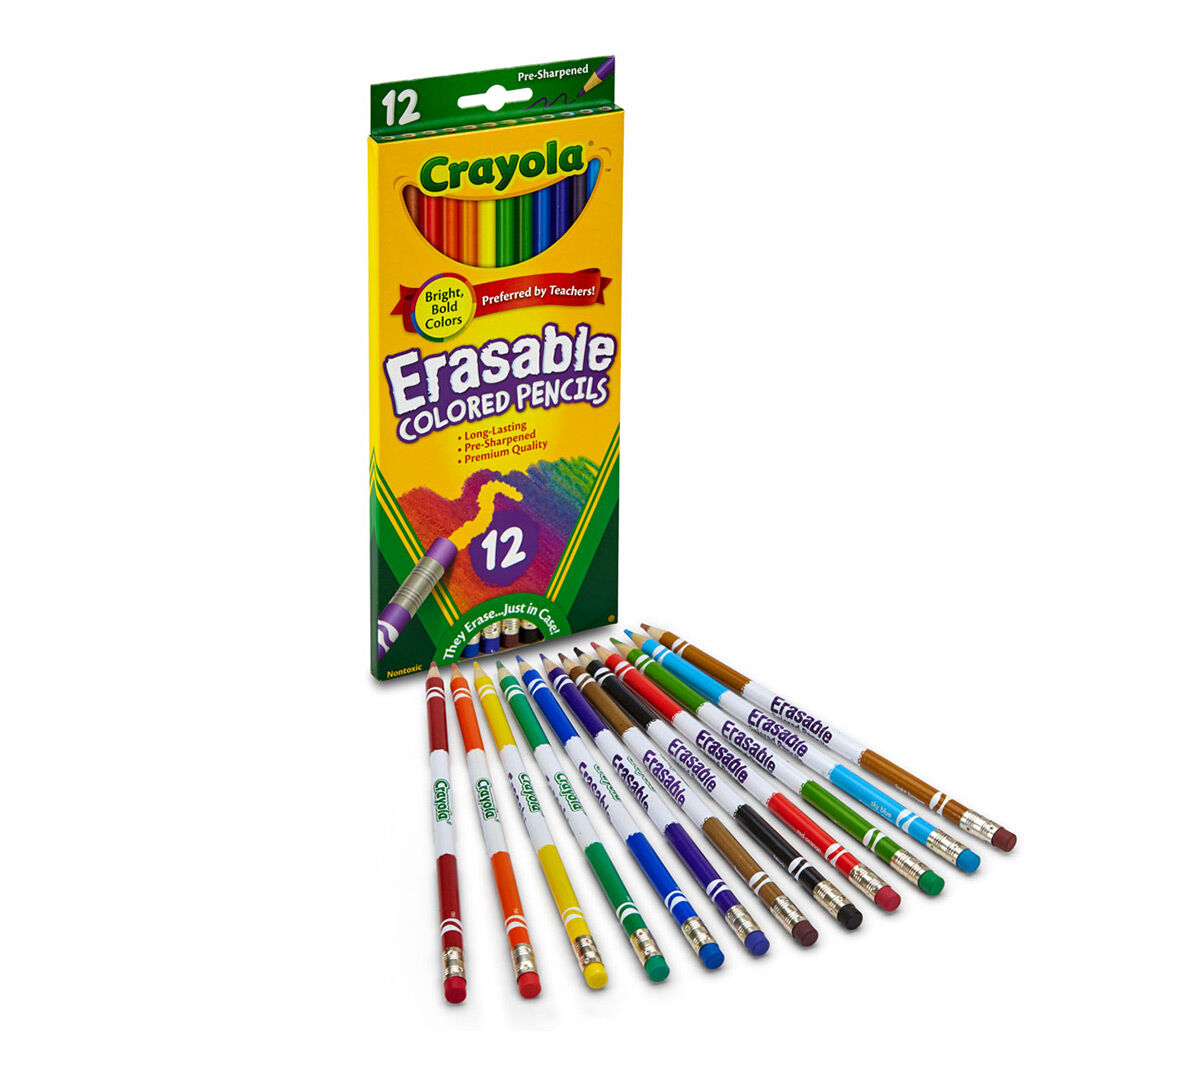 Download Crayola Erasable Colored Pencils, Assorted Colors, Art Tools for Kids, 12 Count